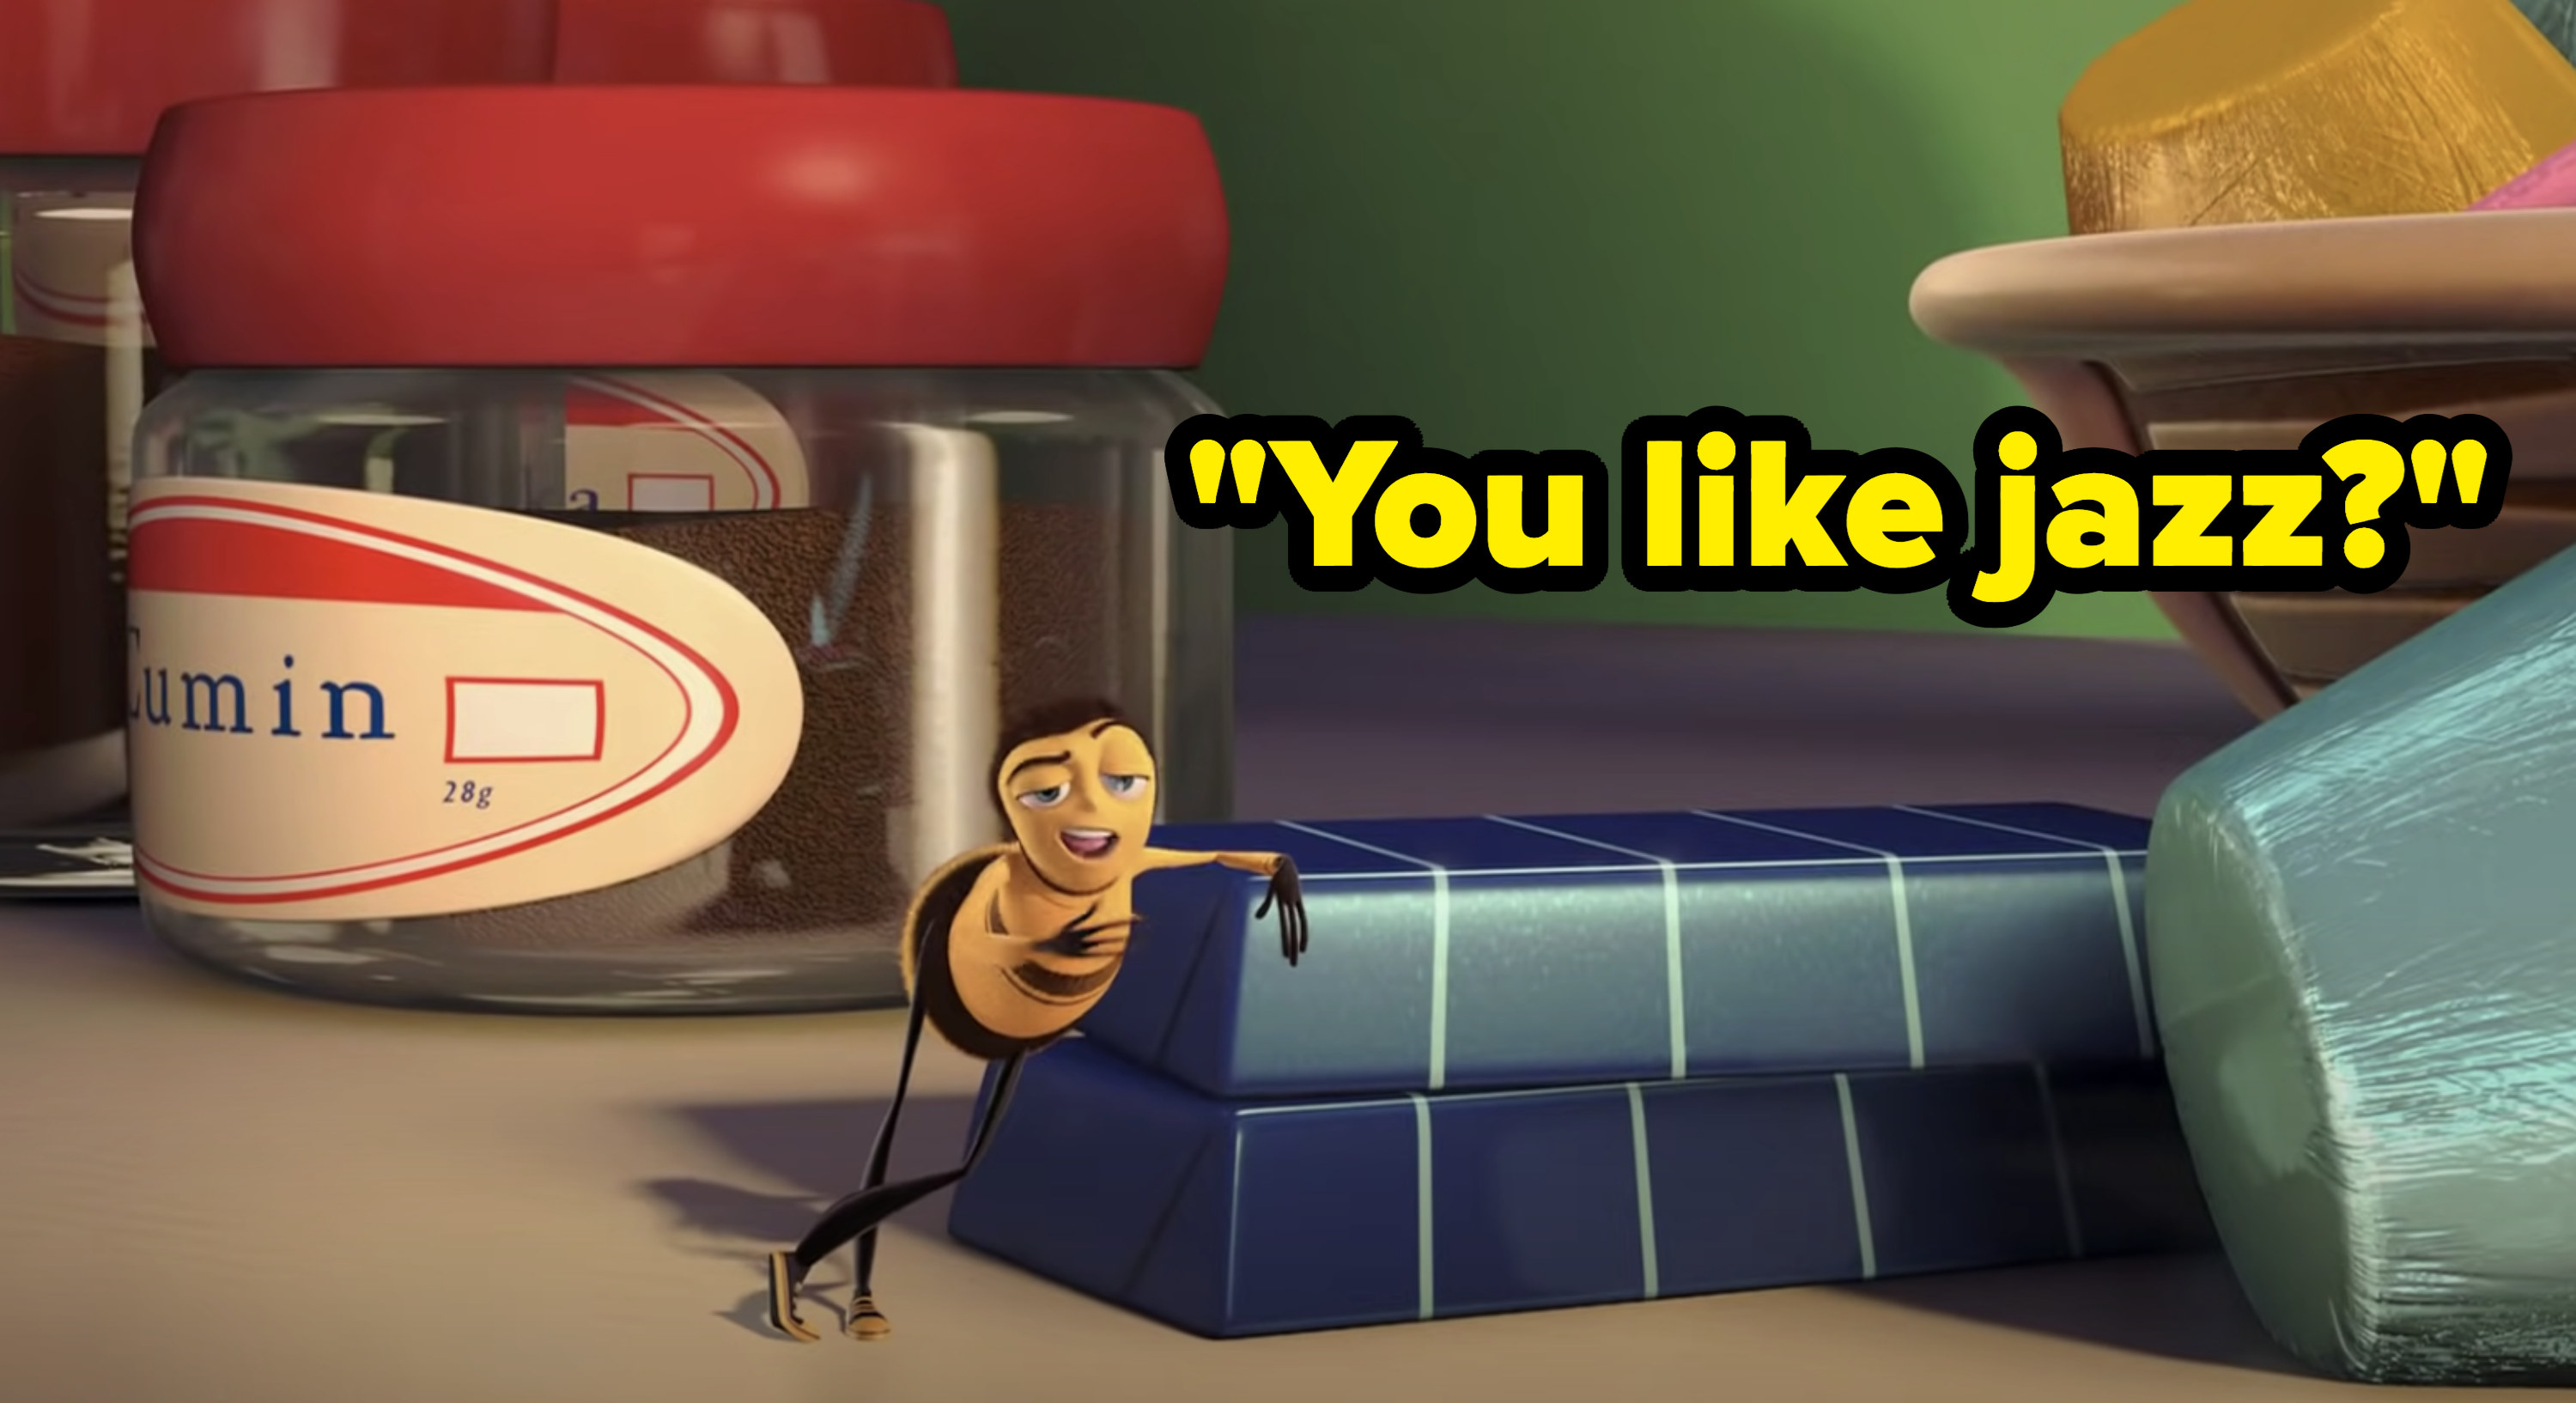 Barry the bee leaning against a household item asking &quot;You like jazz?&quot;